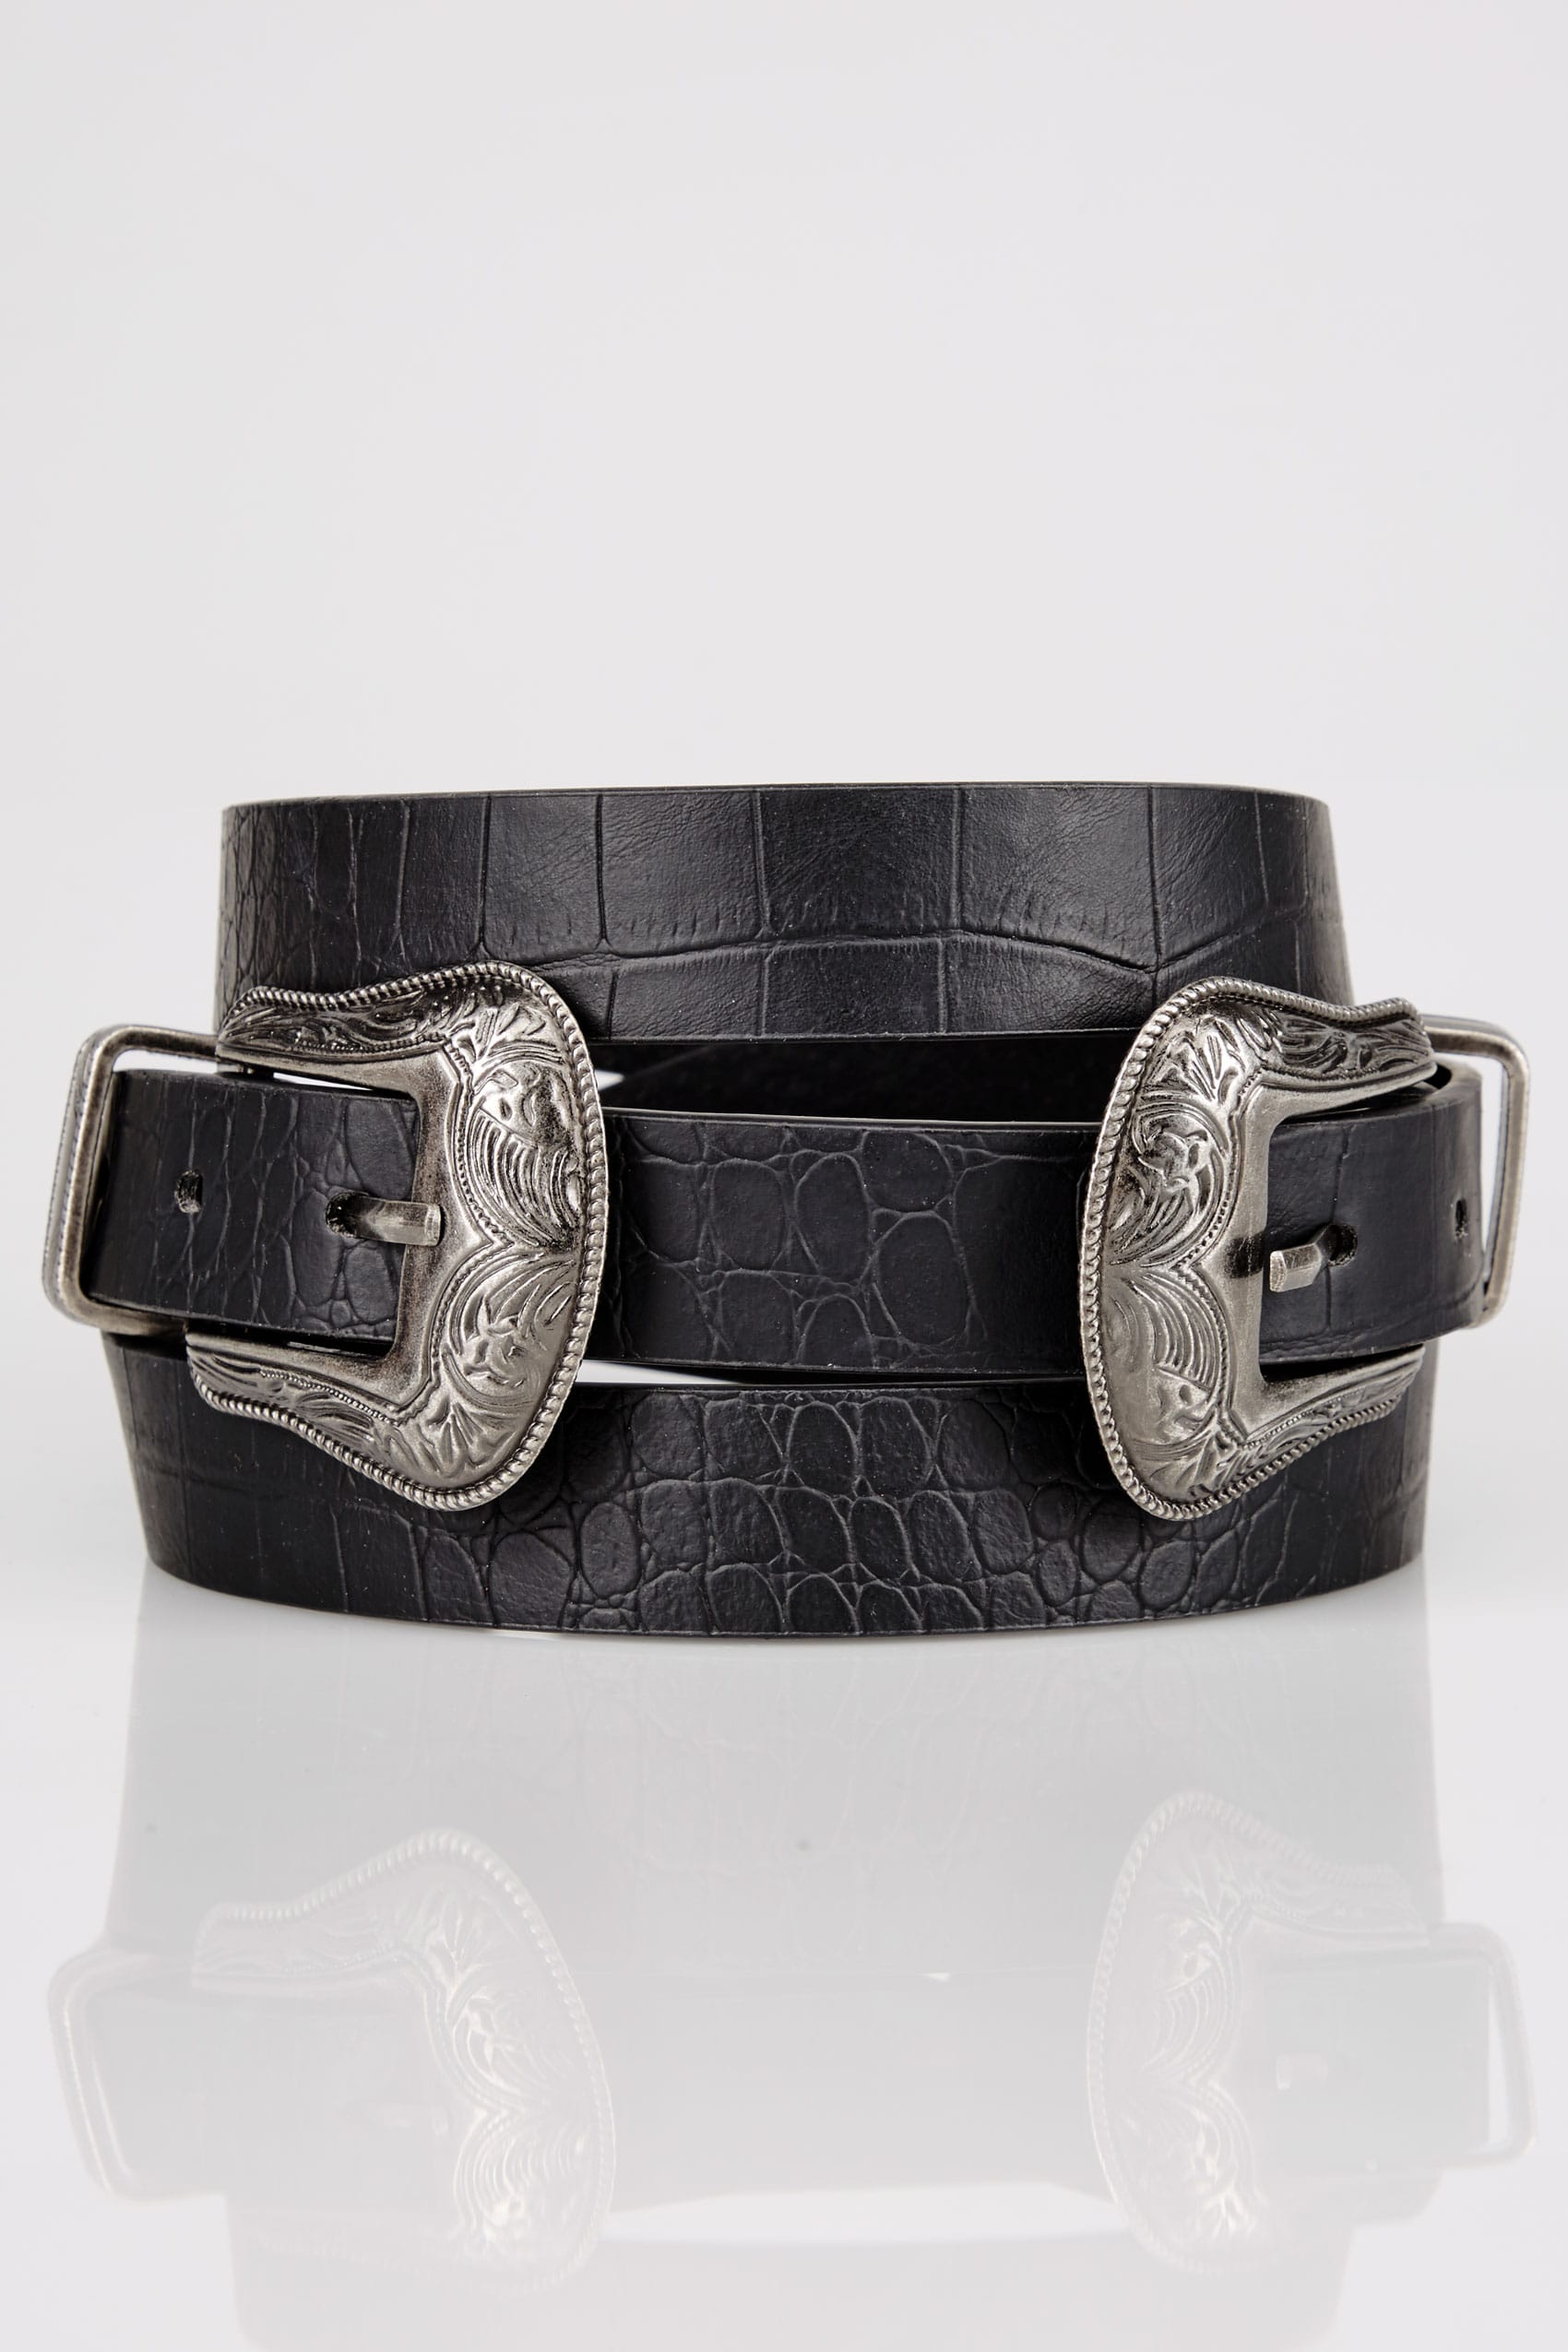 Black Textured PU Belt With Double Western Style Buckles, Plus size 16 ...